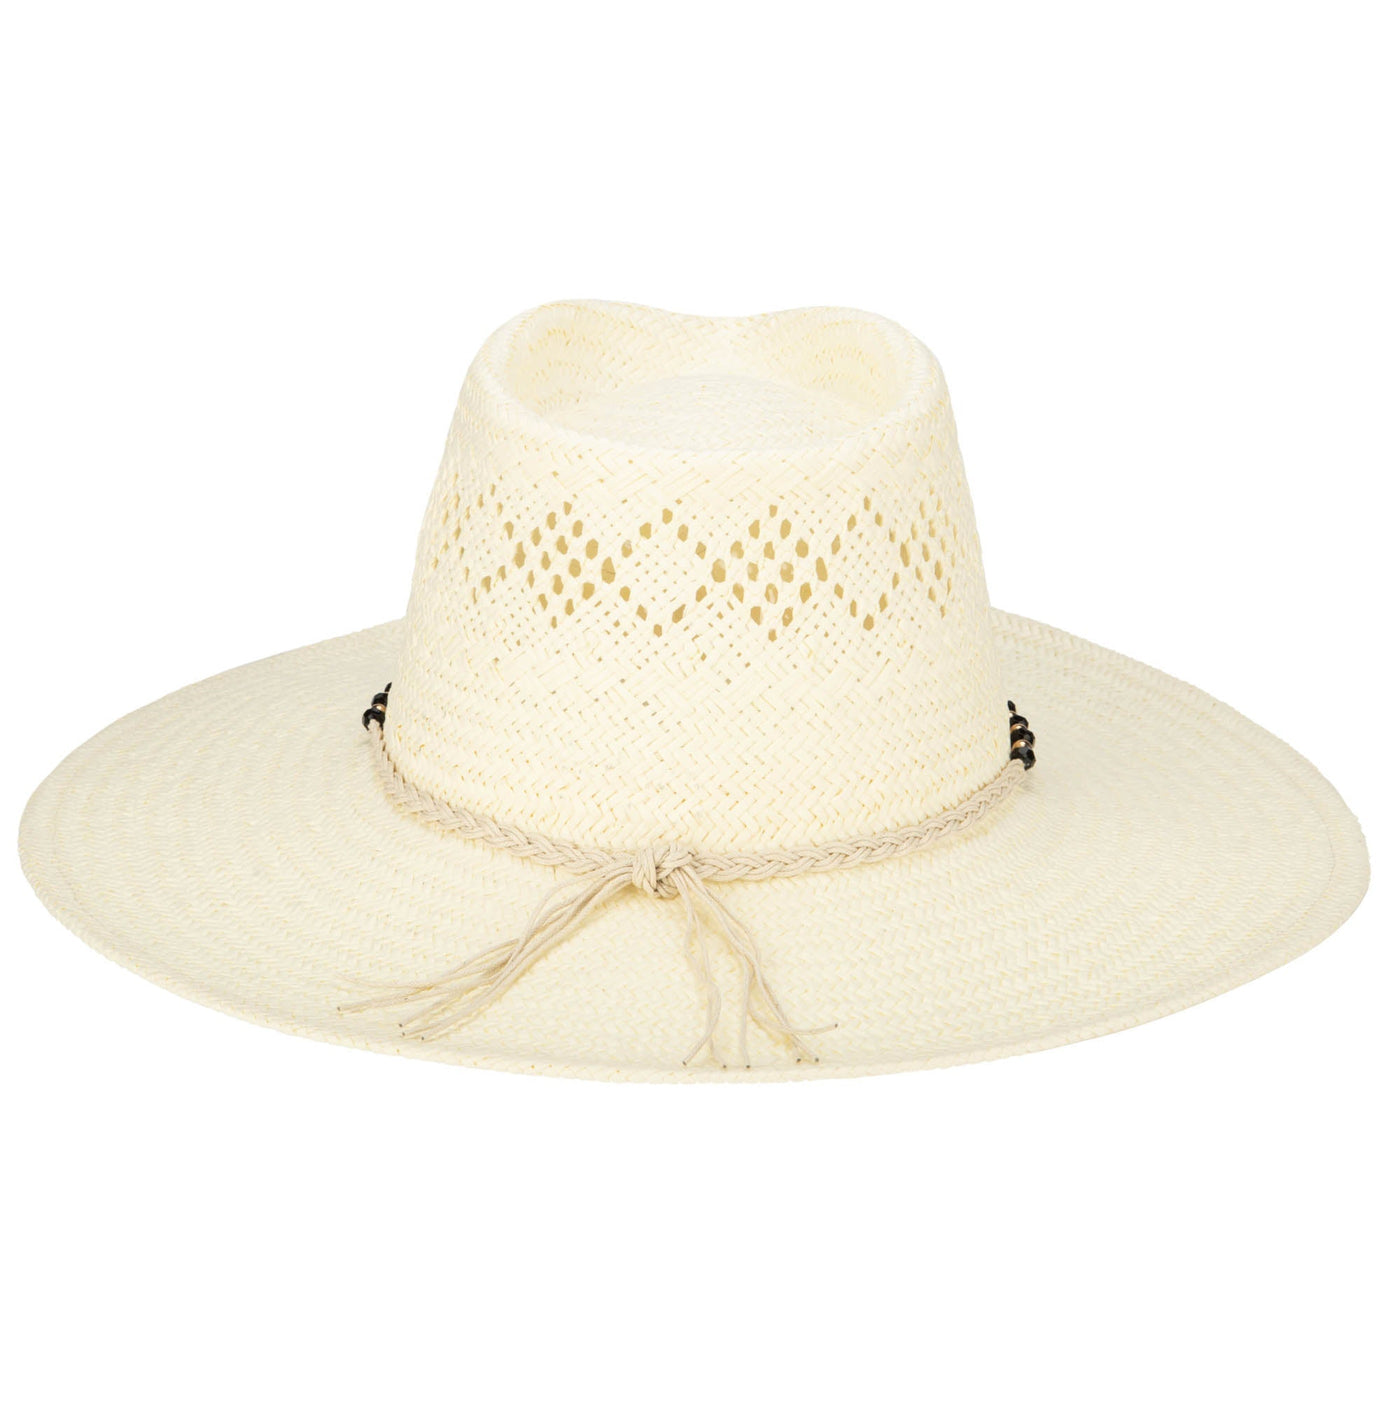 FEDORA - Anytime - Woven Paper Fedora With Beaded Band